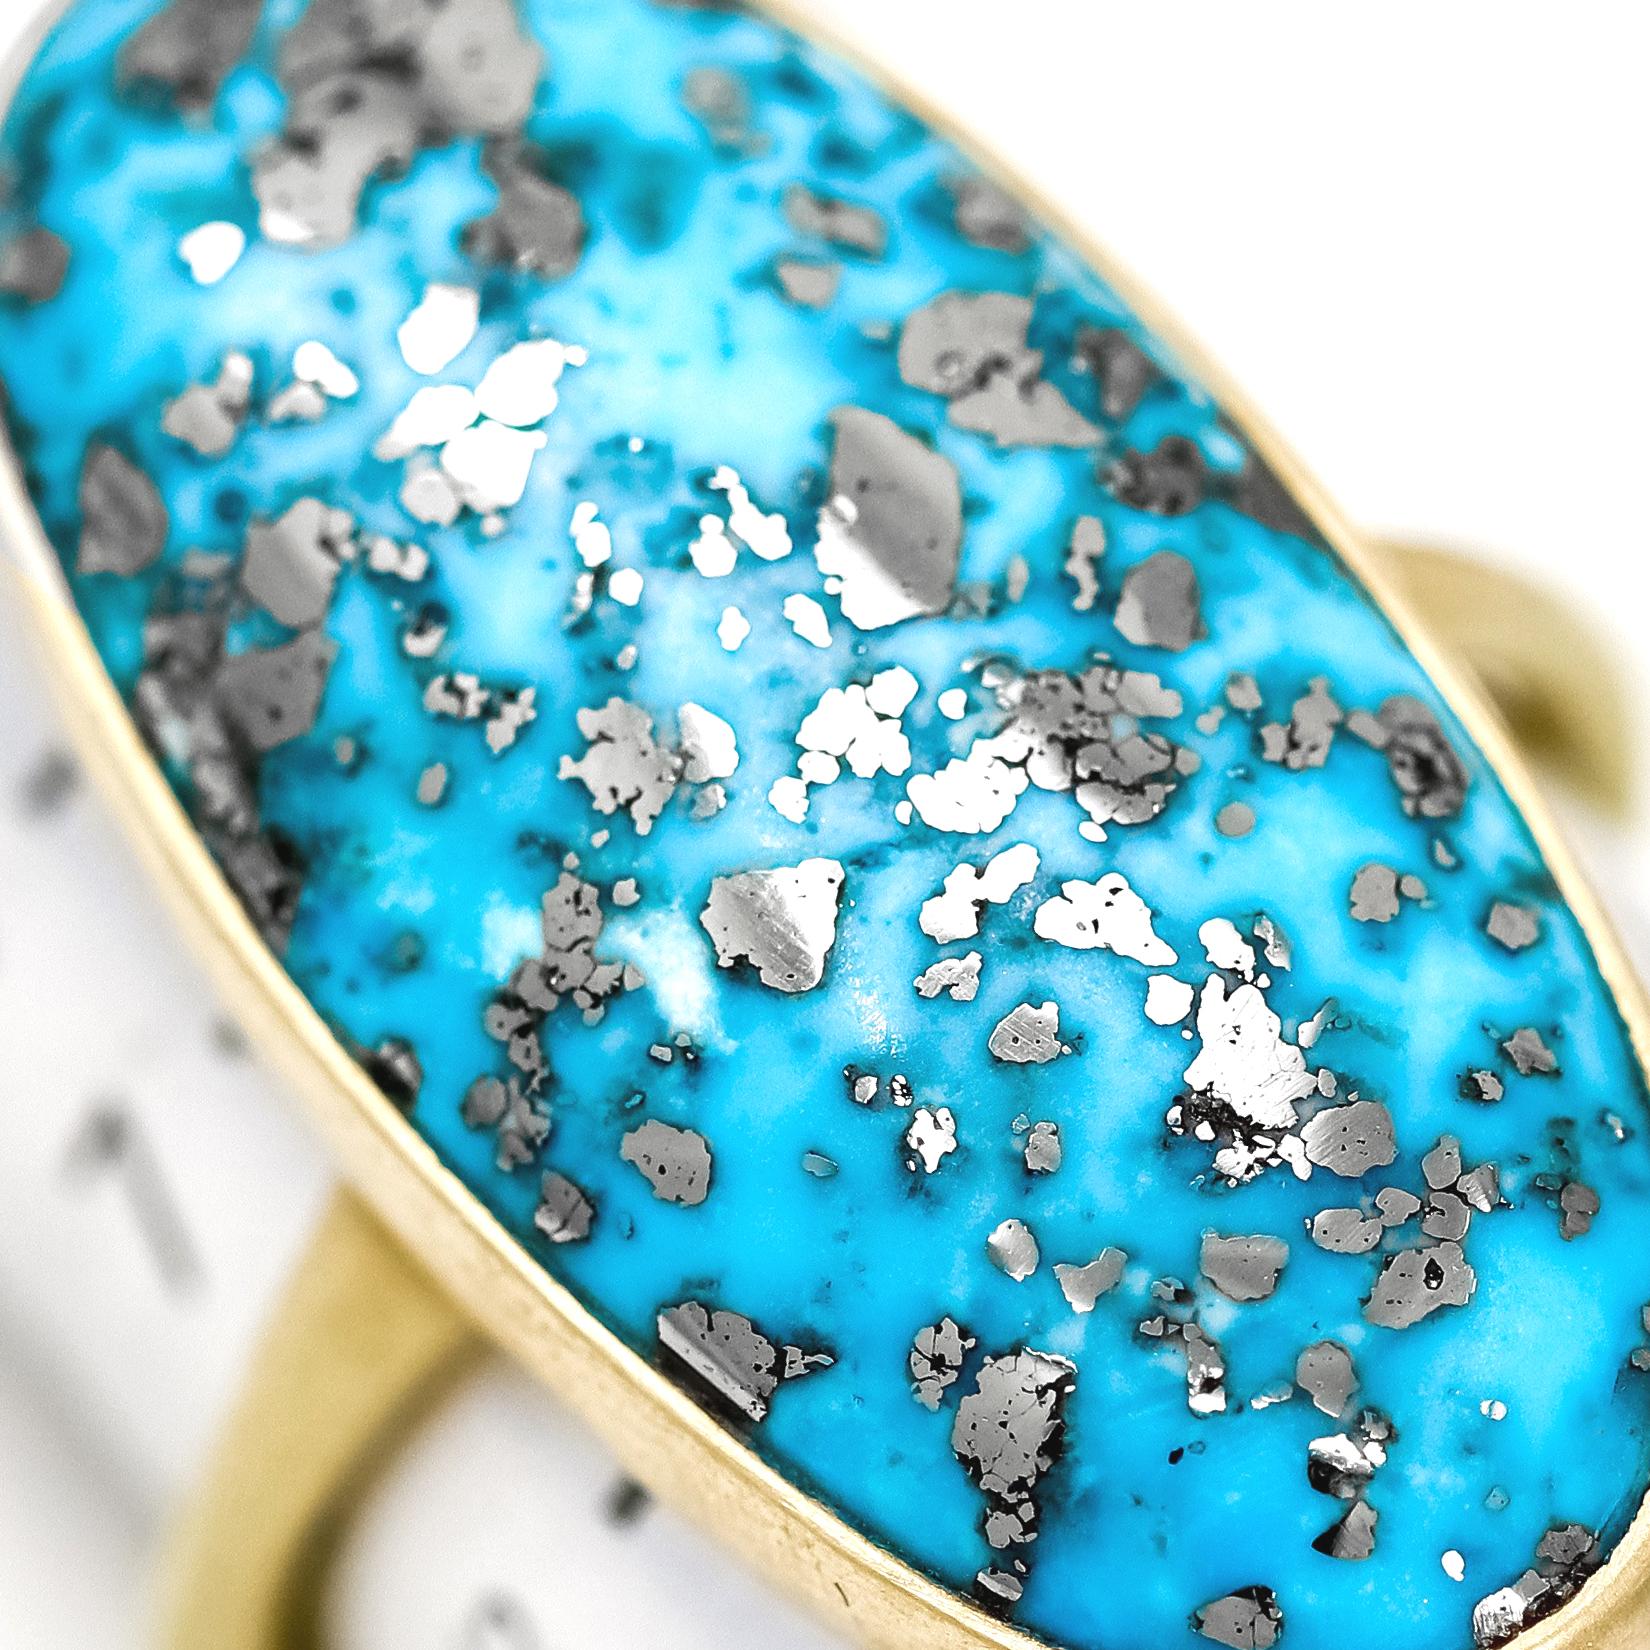 One of a Kind Ring hand-fabricated by jewelry maker Lola Brooks featuring an extraordinary 16.81ct oval turquoise cabochon that beautifully exhibits a natural metallic Pyrite matrix, providing a distinctive mirrored effect to the gemstone. The